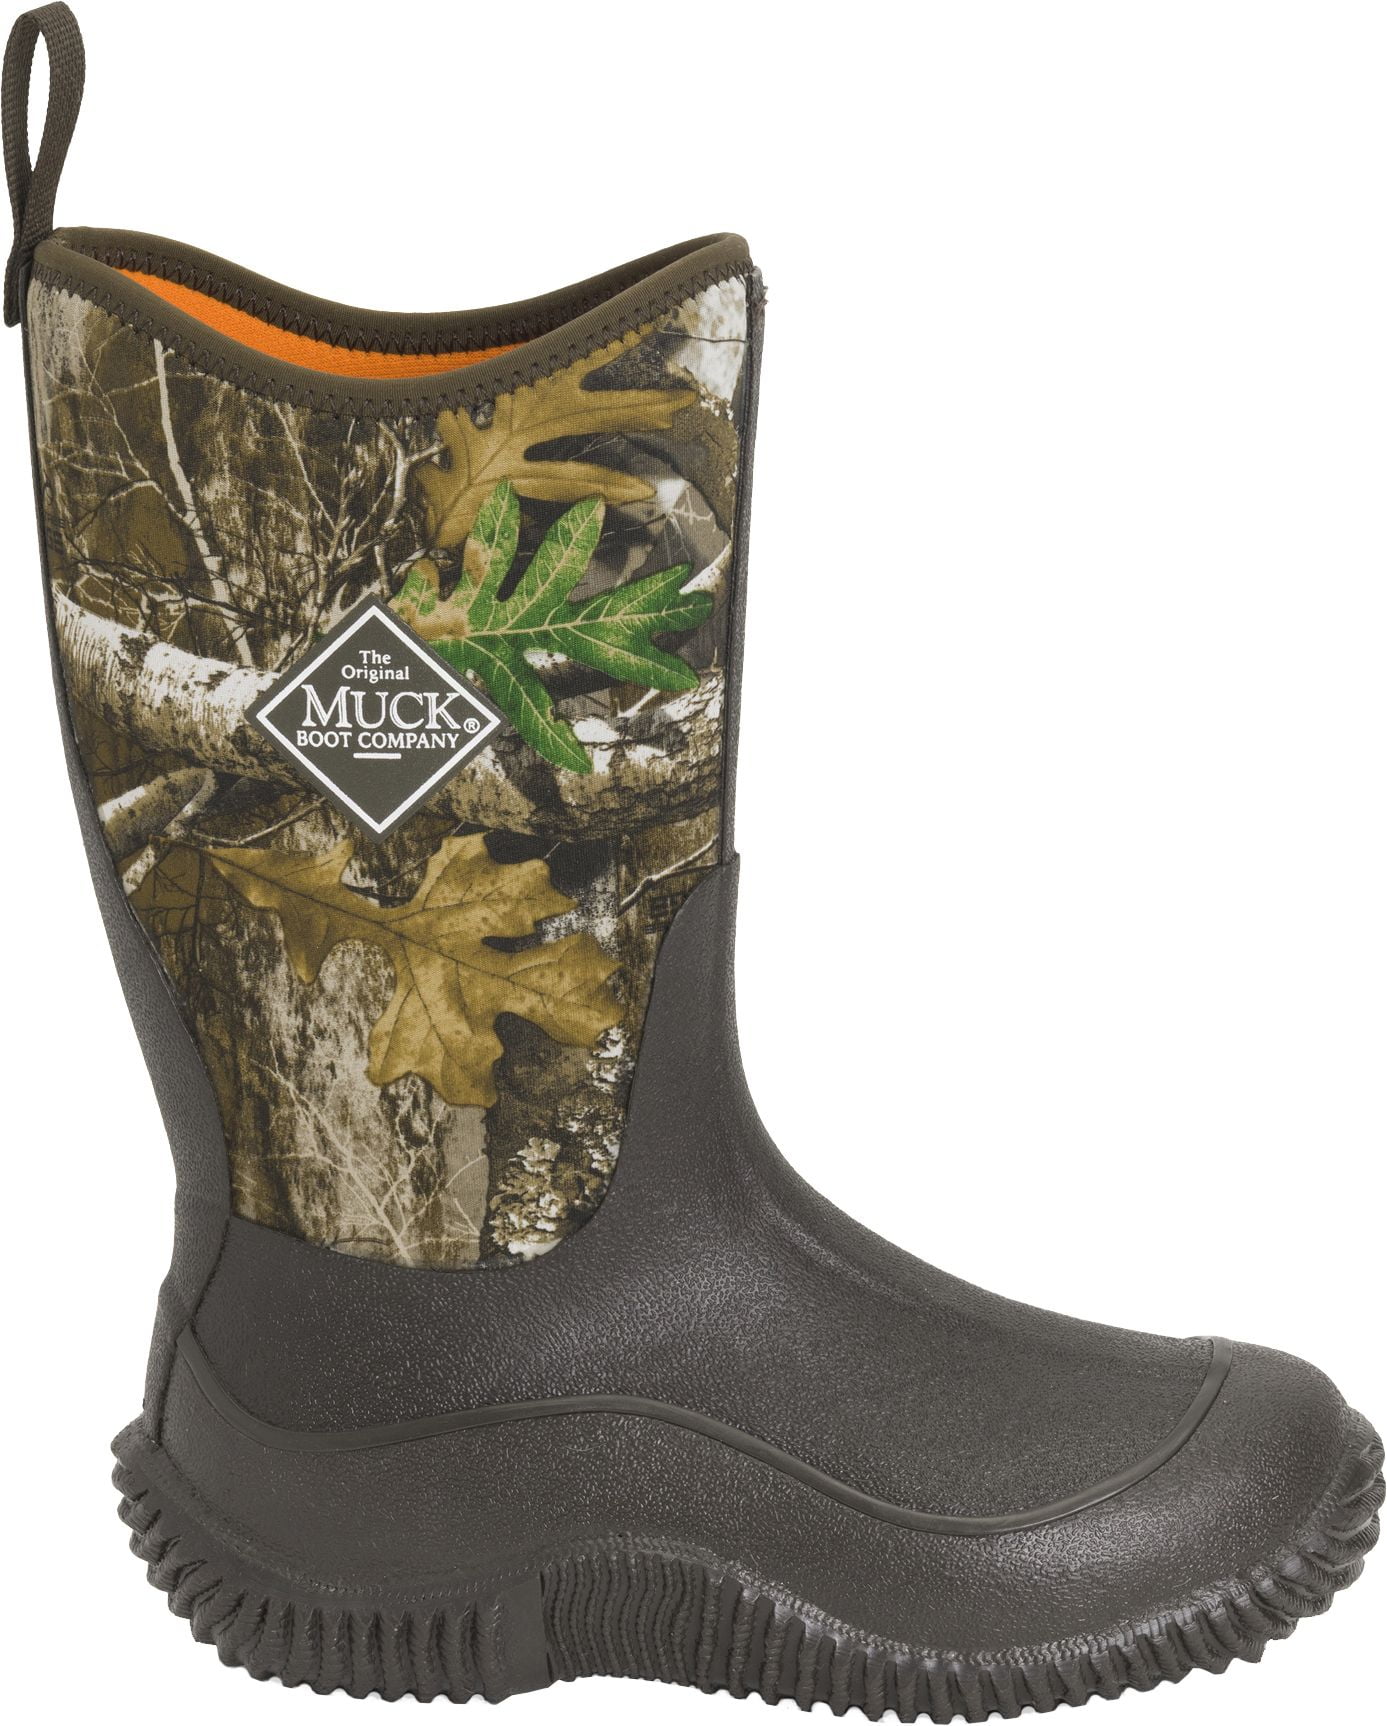 Muck Boots Kids' Hale Realtree Edge Rubber Hunting Boots - Walmart.com